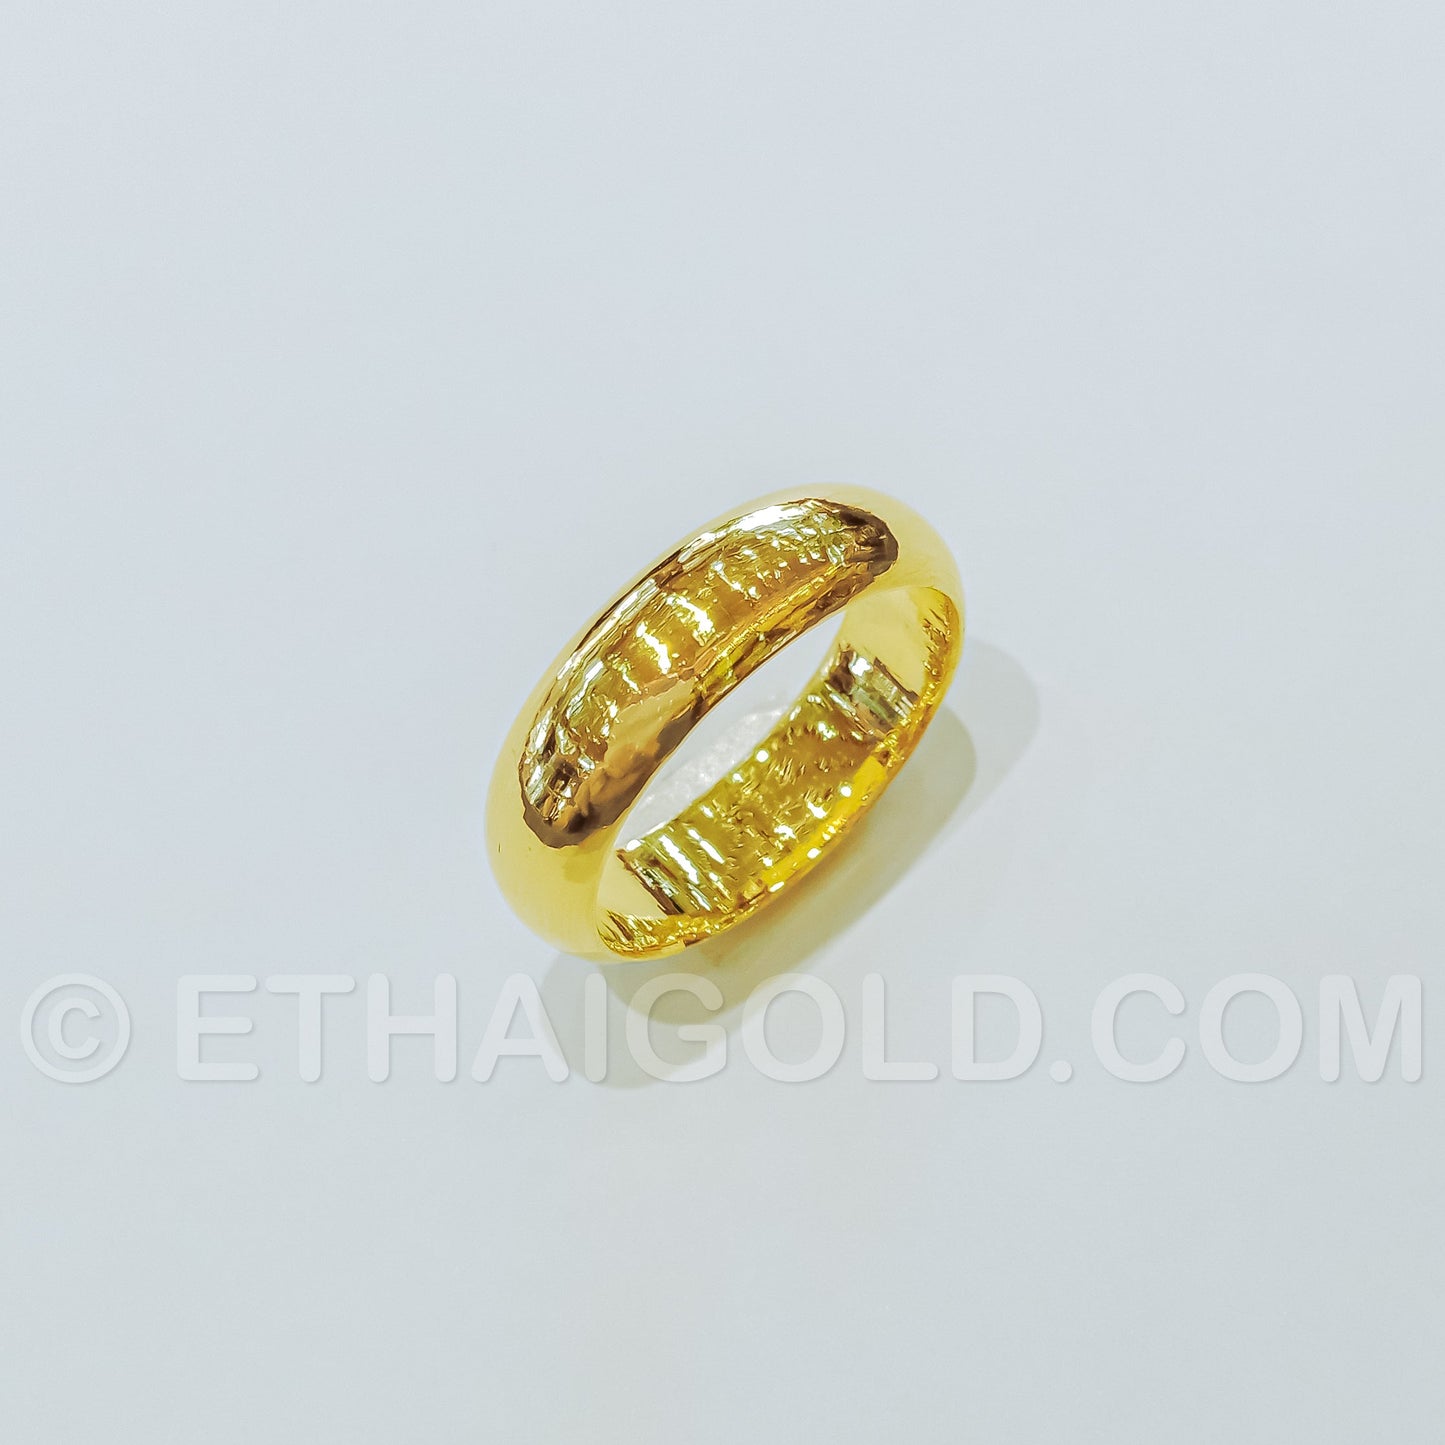 1/4 BAHT POLISHED SOLID DOMED WEDDING BAND RING IN 23K GOLD (ID: R0401S)